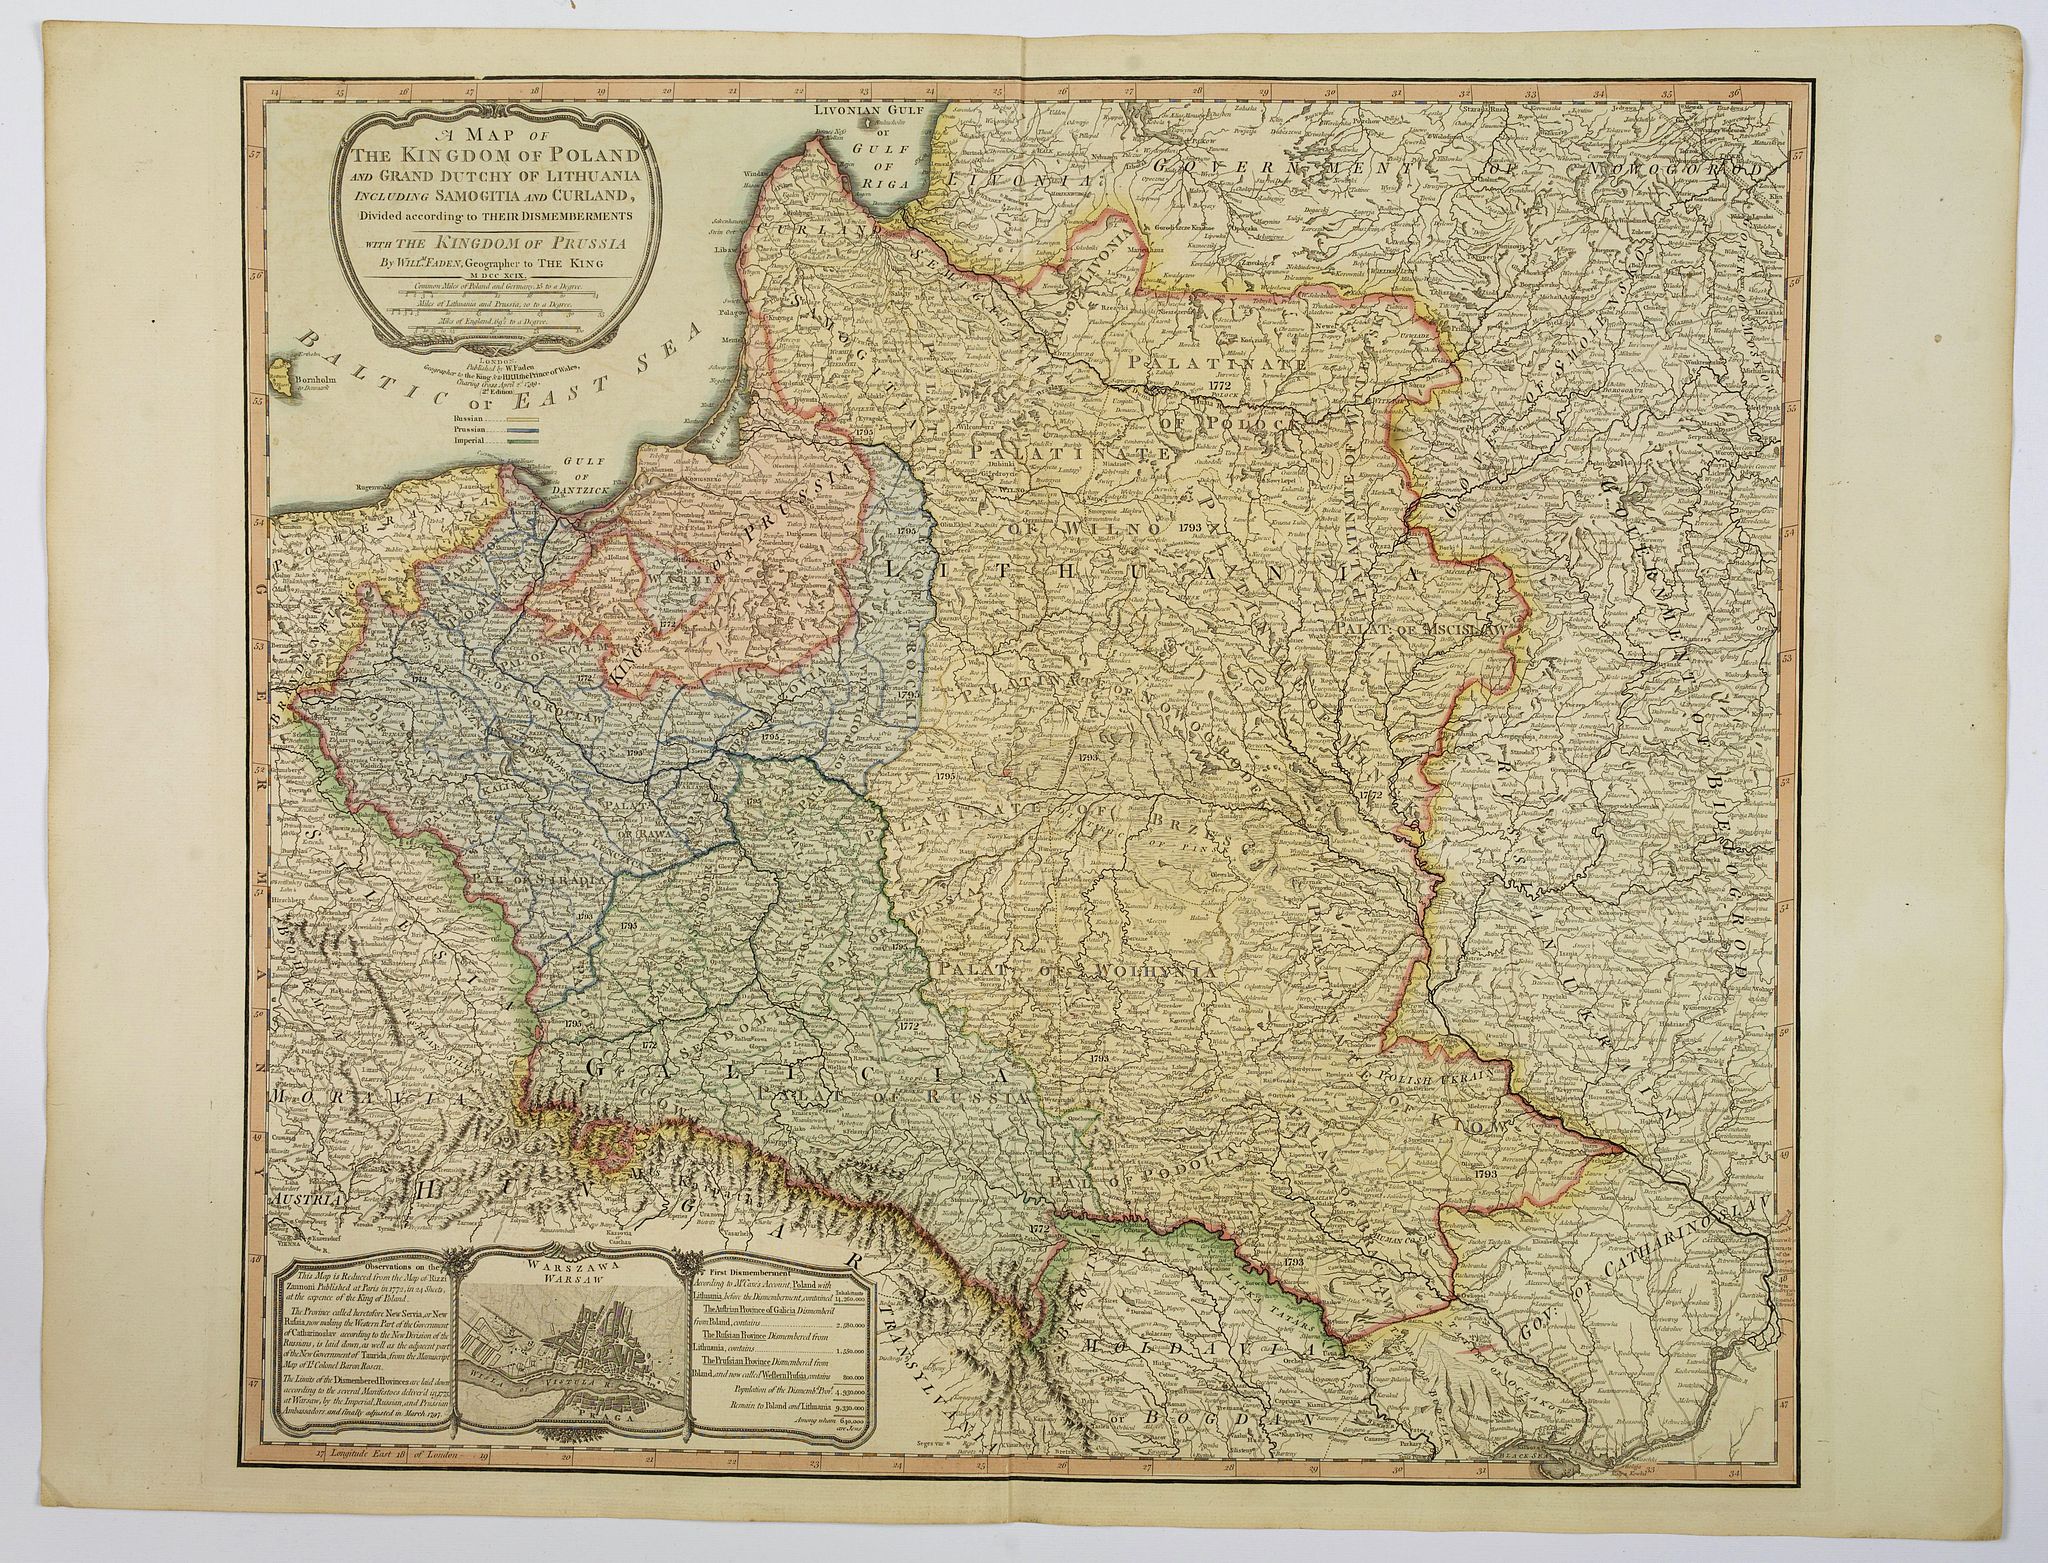 A Map of The Kingdom of Poland and Grand Dutchy of Lithuania including Samogitia and Curland, divided into their Dismemberments. . .